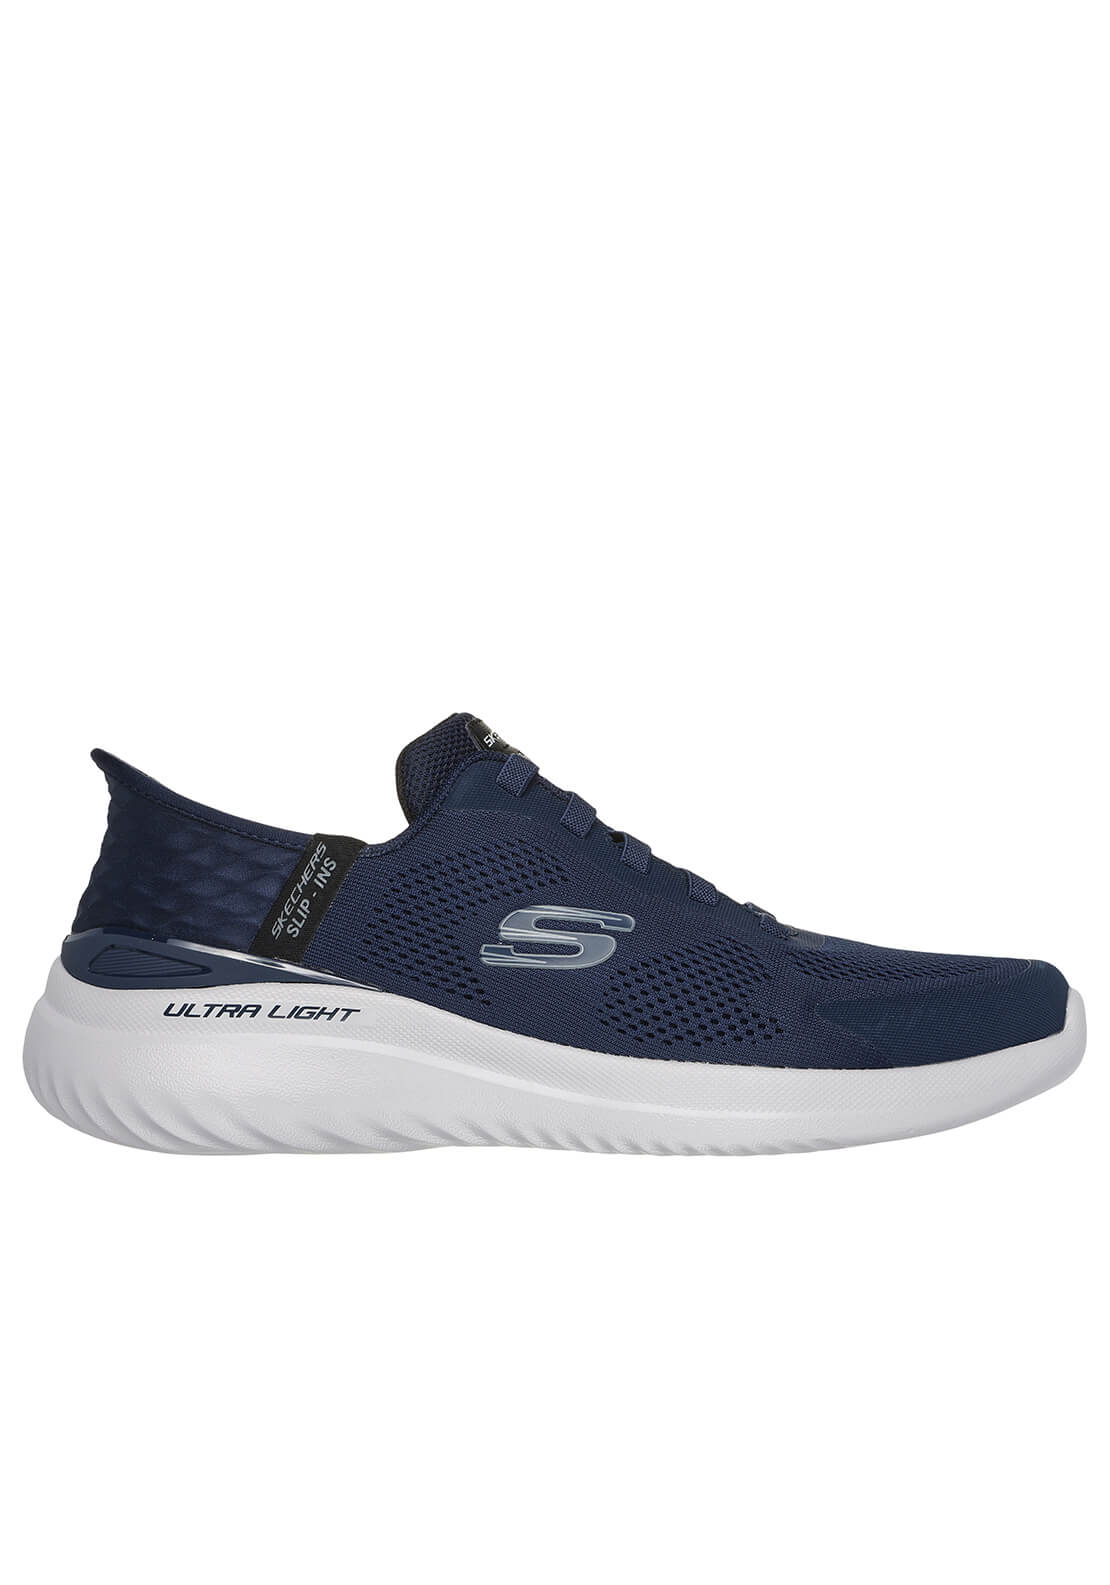 Skechers Bounder 2.0 Emerged - Navy 3 Shaws Department Stores